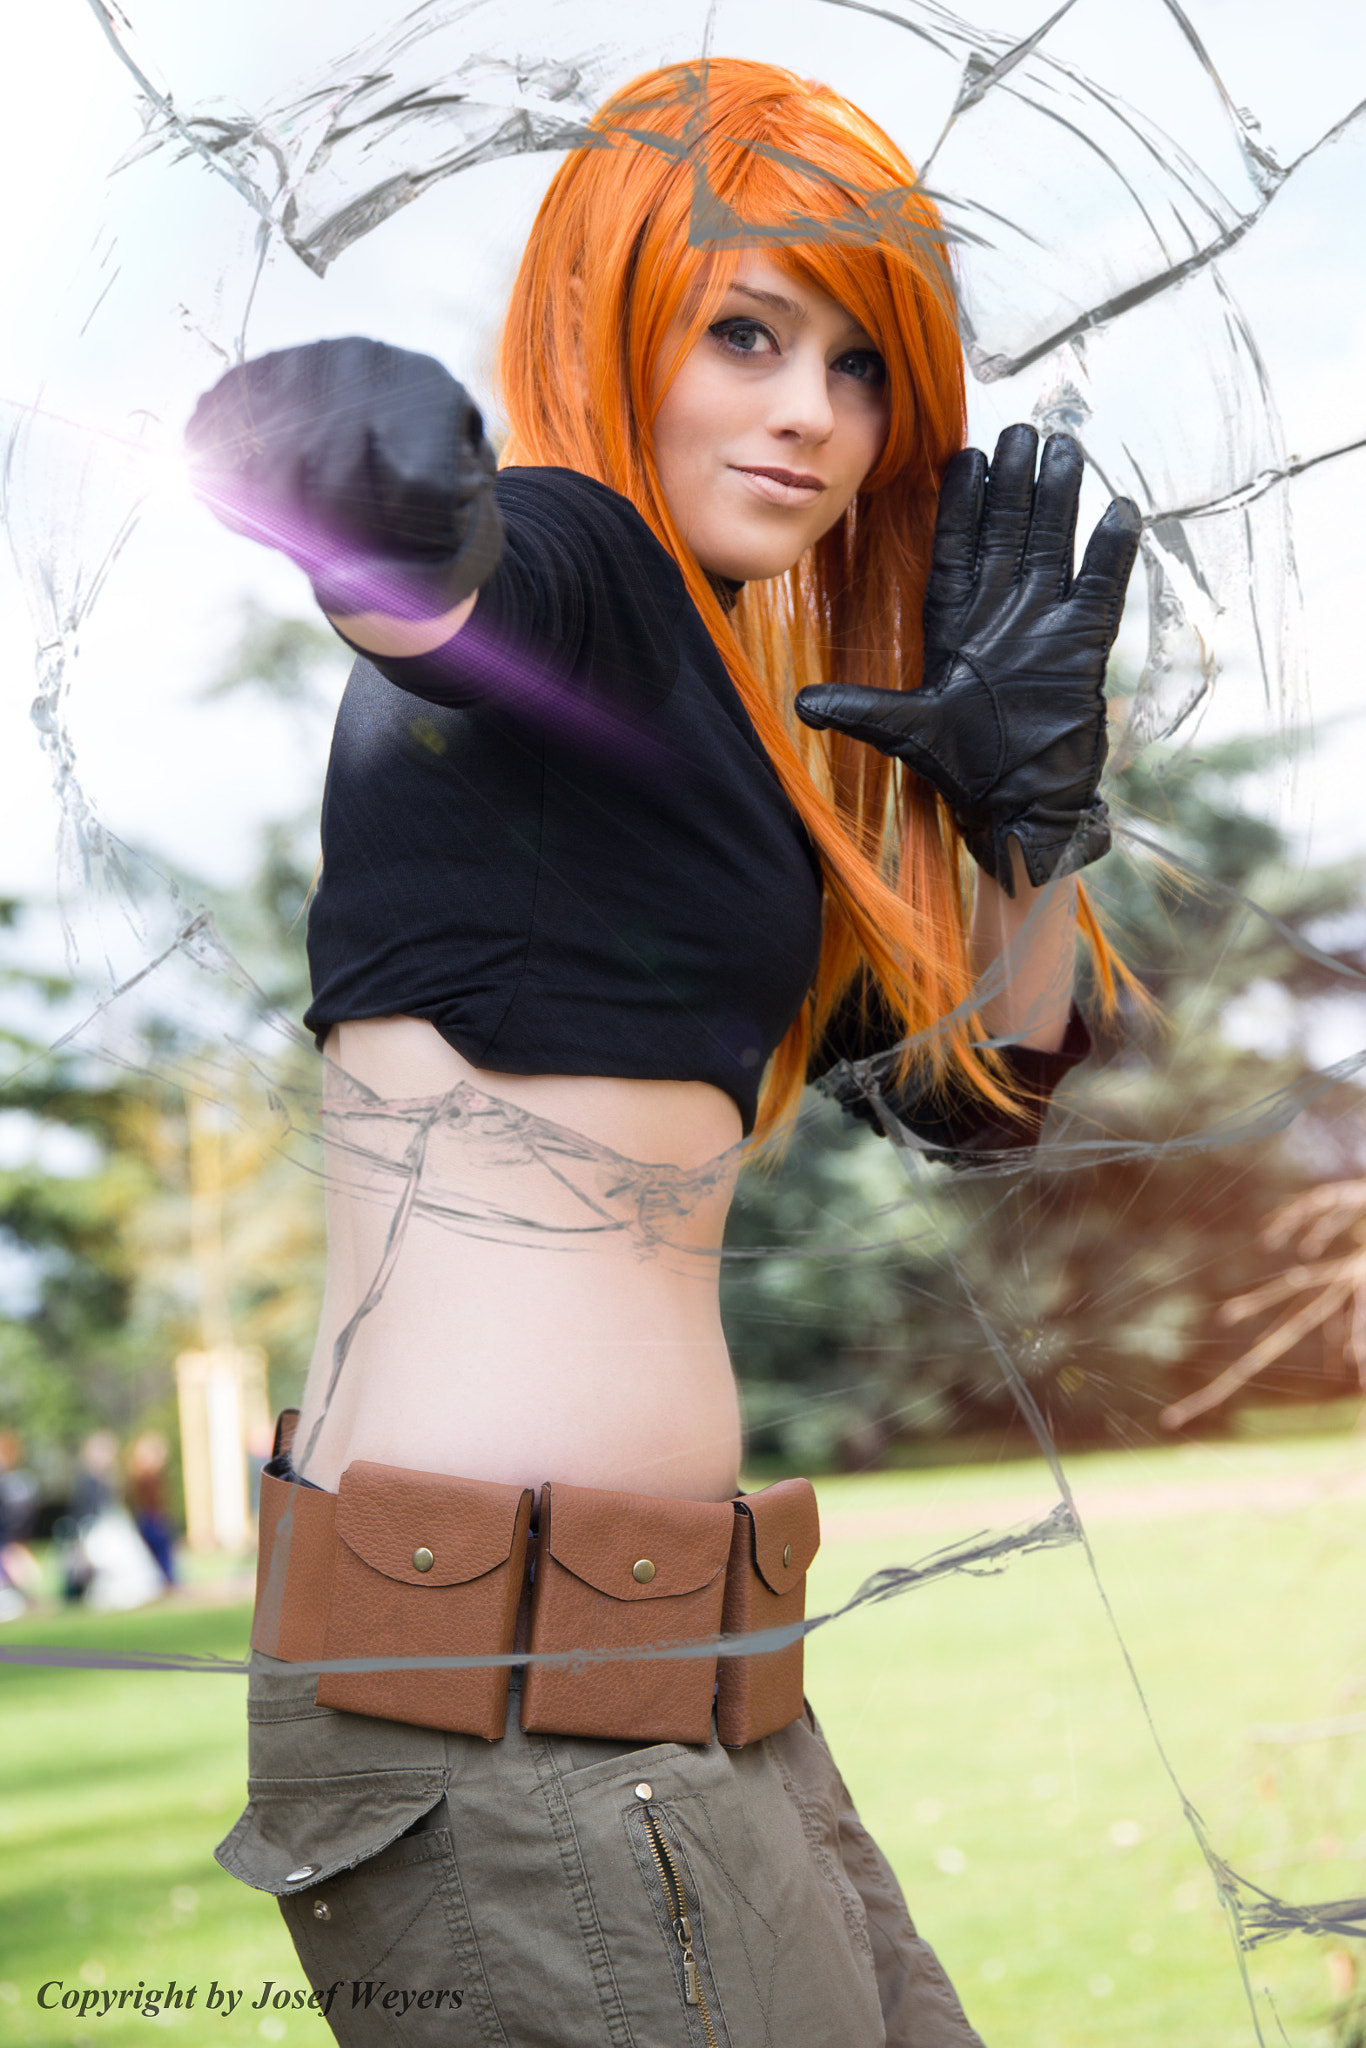 Canon EOS 6D + Sigma 24-105mm f/4 DG OS HSM | A sample photo. Cosplay photography